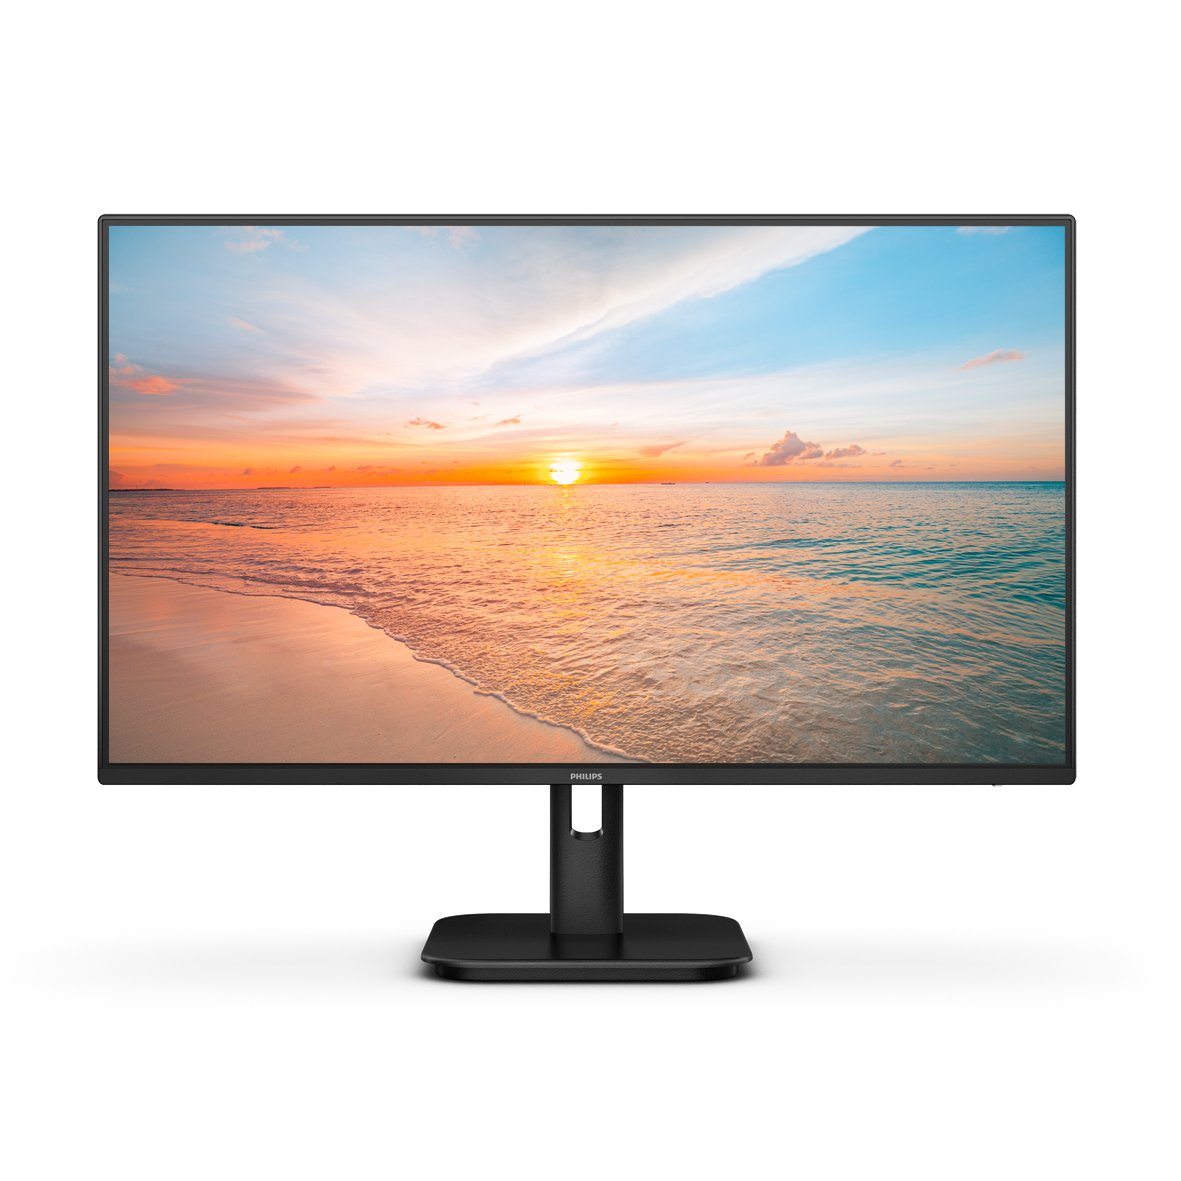 Philips presents the E1 Series: four new monitors for the Home Office